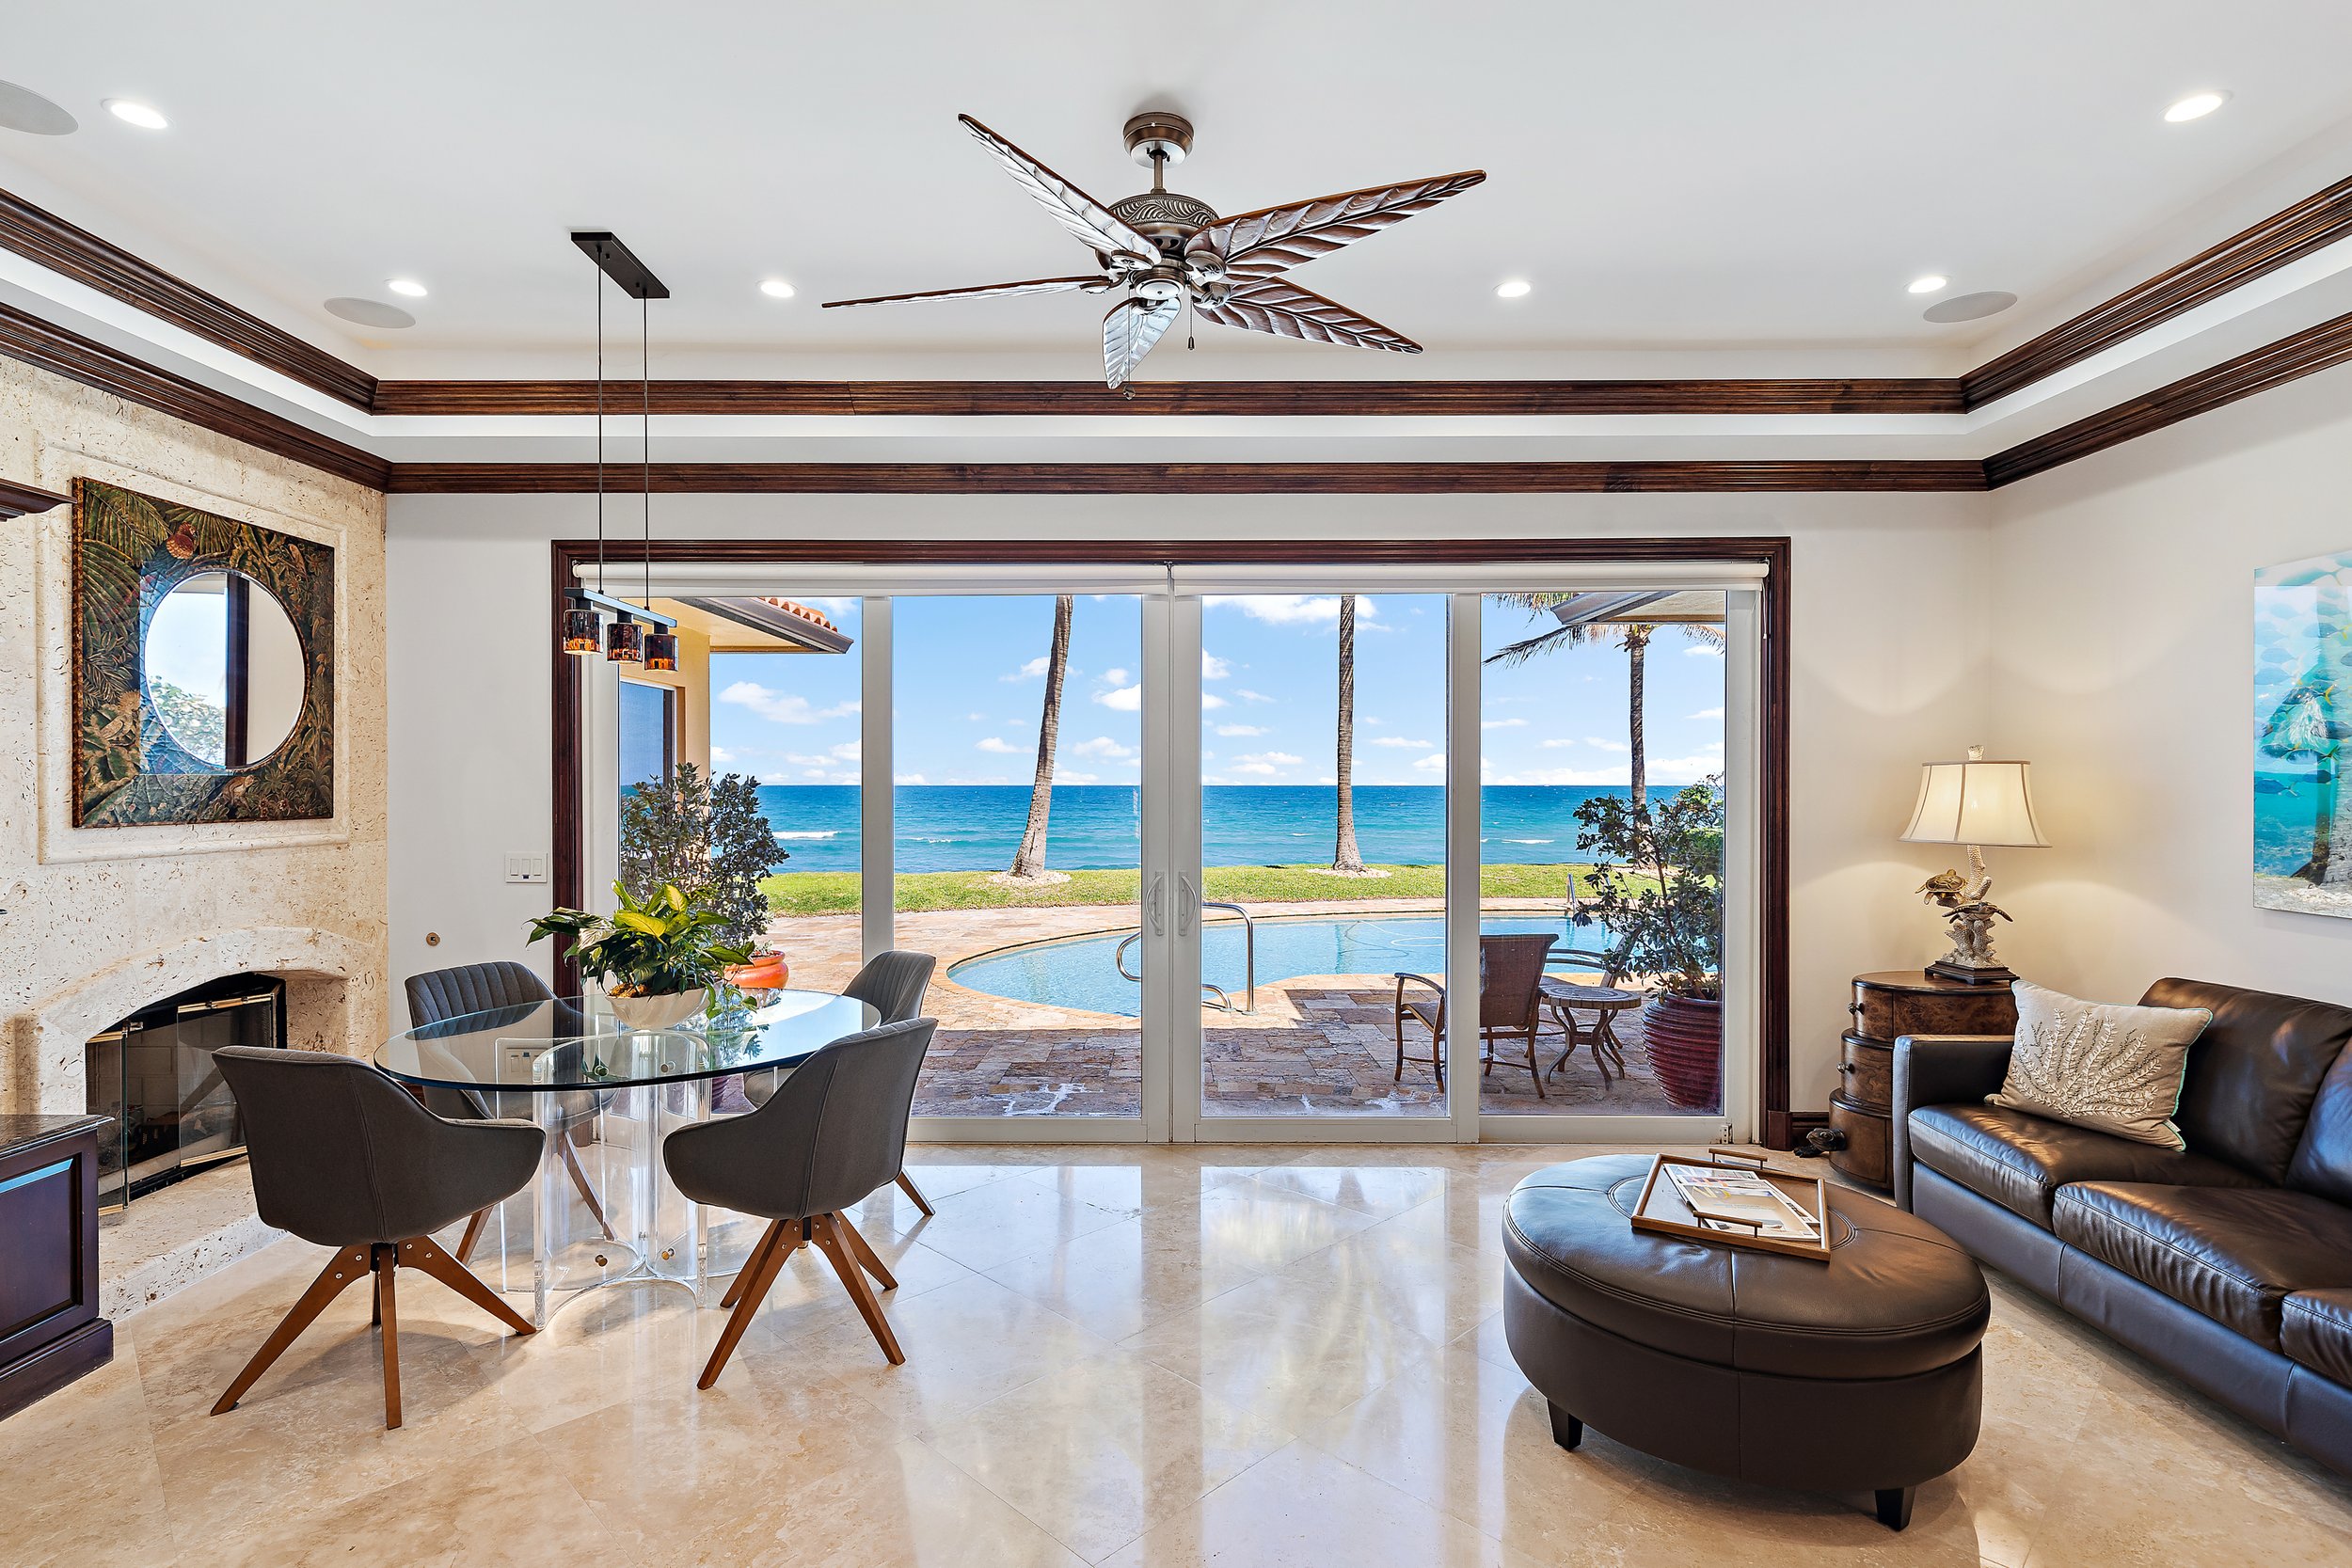 Tour A Jupiter Beachfront Mansion Owned By Clyde R. %22Buzz%22 Gibb Which Is Asking $24.9 Million 117.jpg